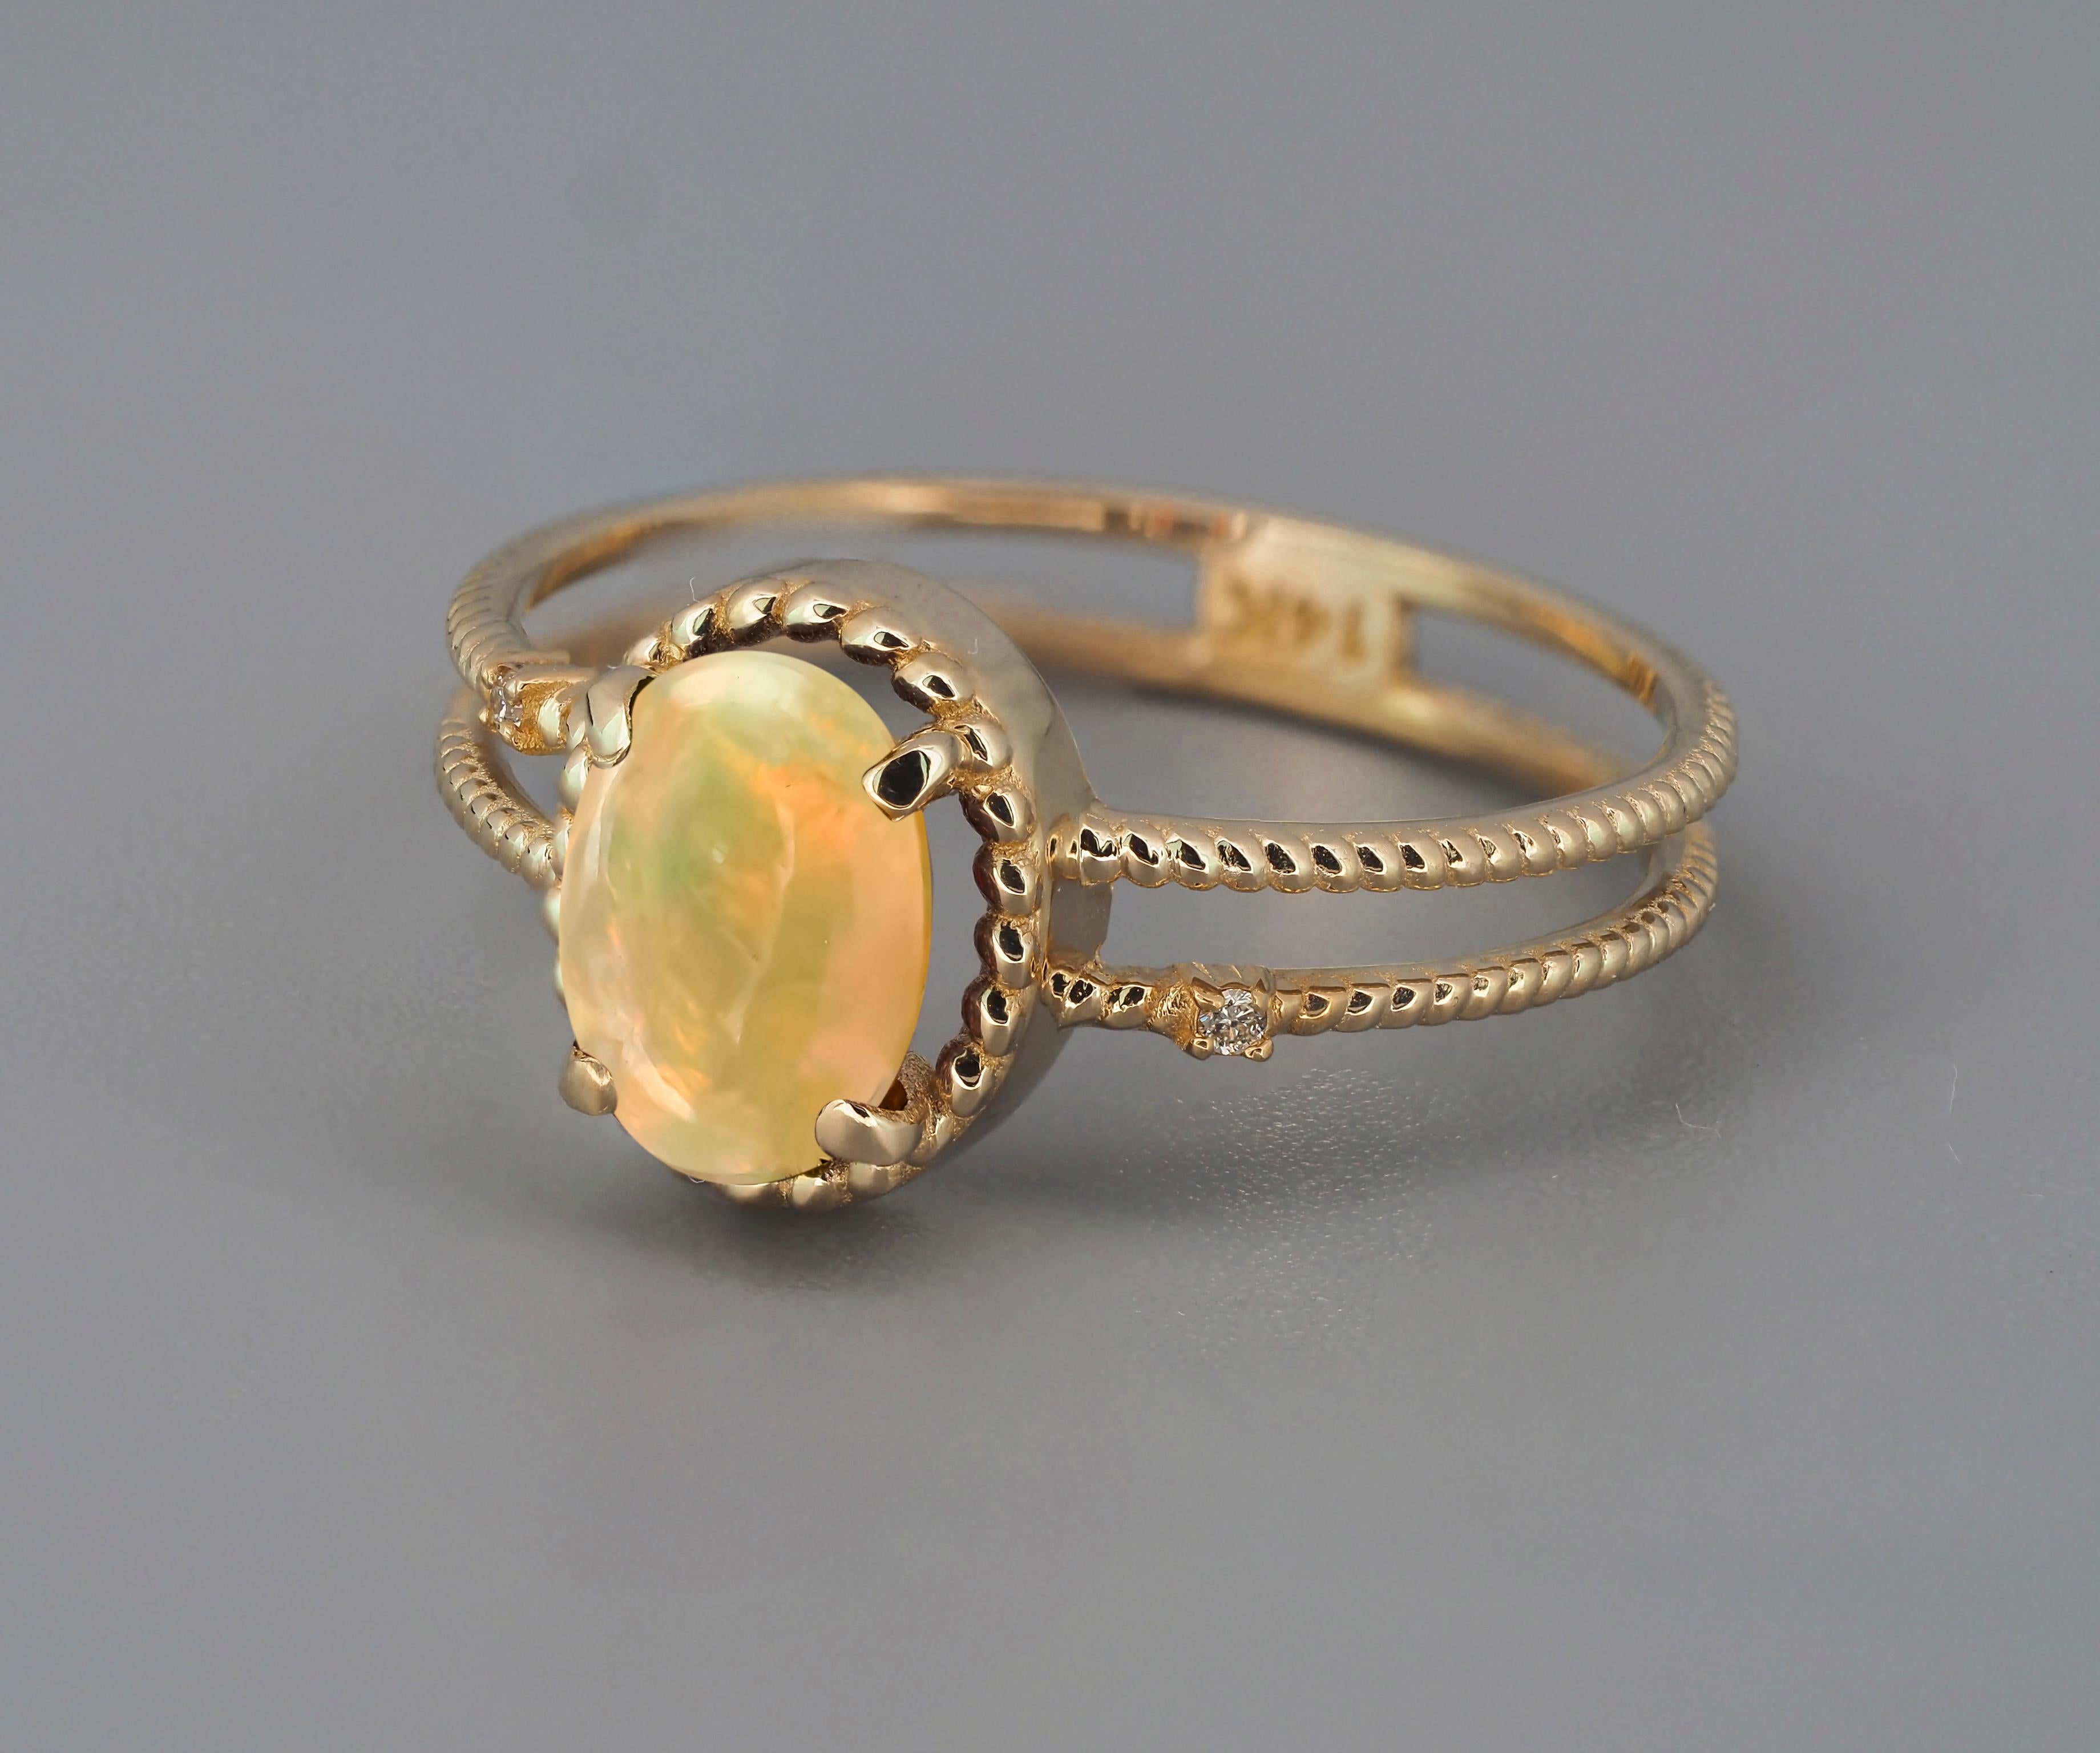 For Sale:  Cabochon Opal Ring. 14k Gold Ring with Opal. Minimalist Opal Ring 4